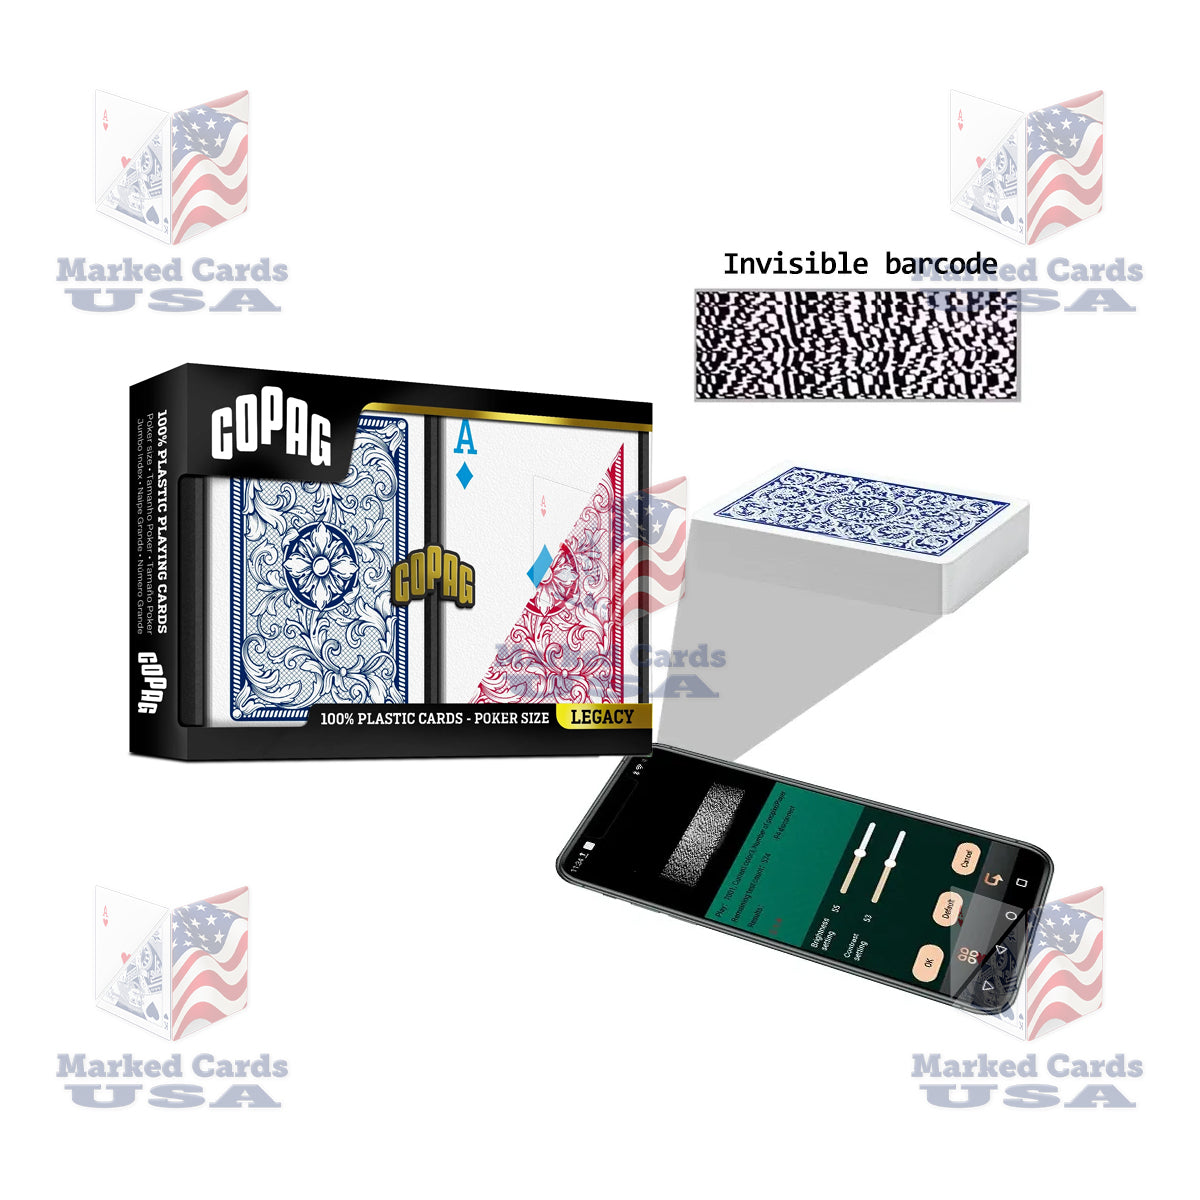 BARCODE MARKED CARDS COPAG LEGACY POKER SIZE REGULAR